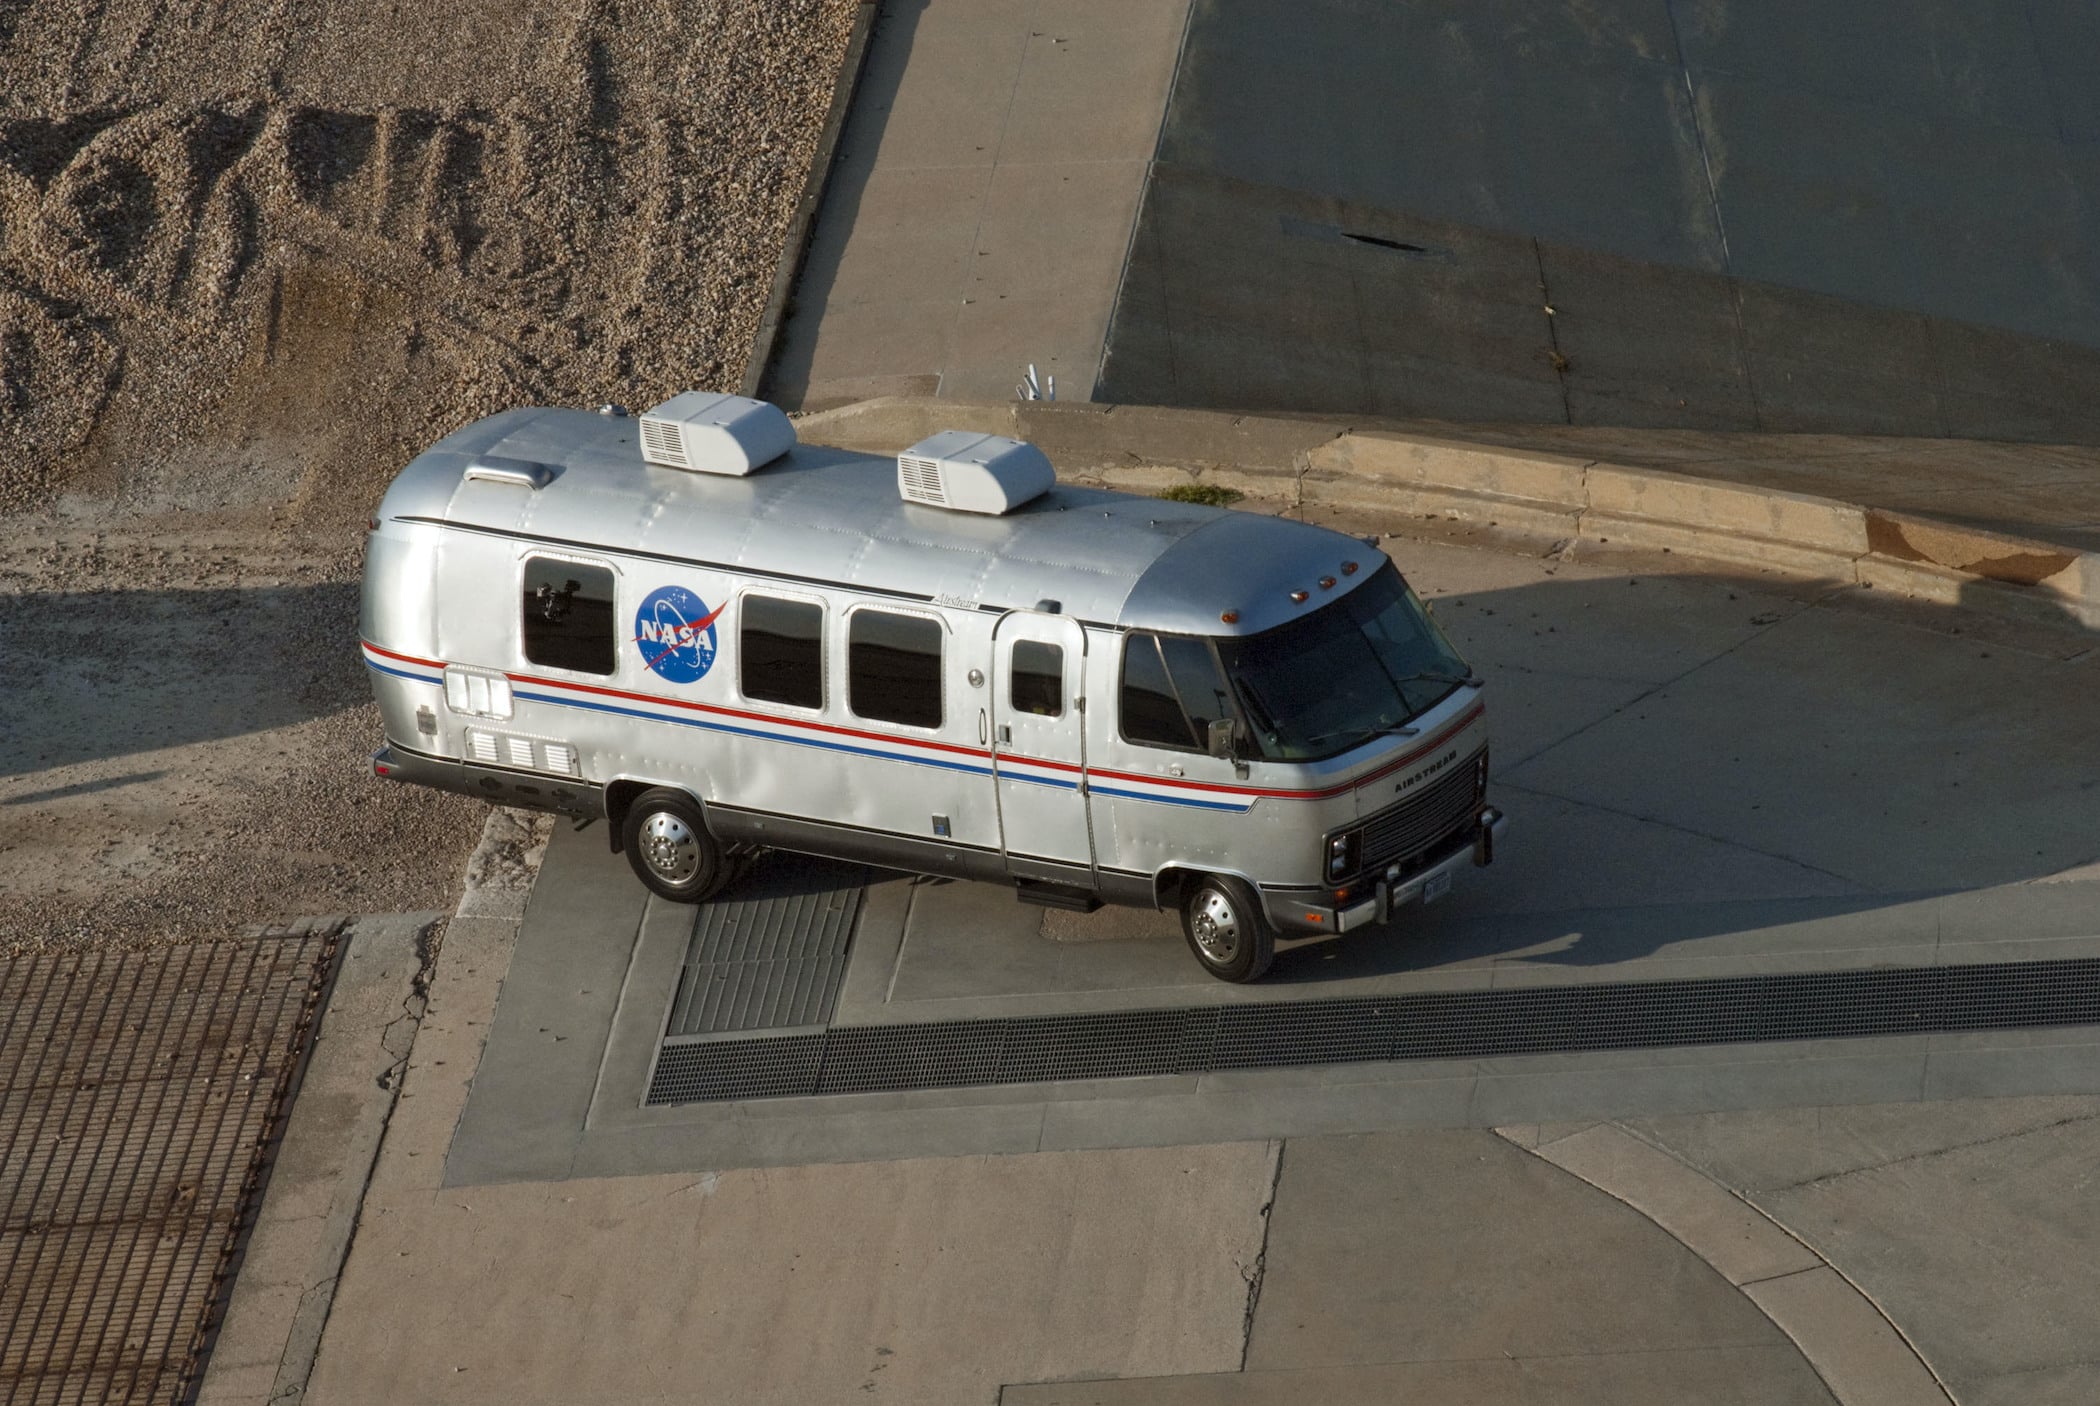 The modified Airstream motor home called the Astrovan